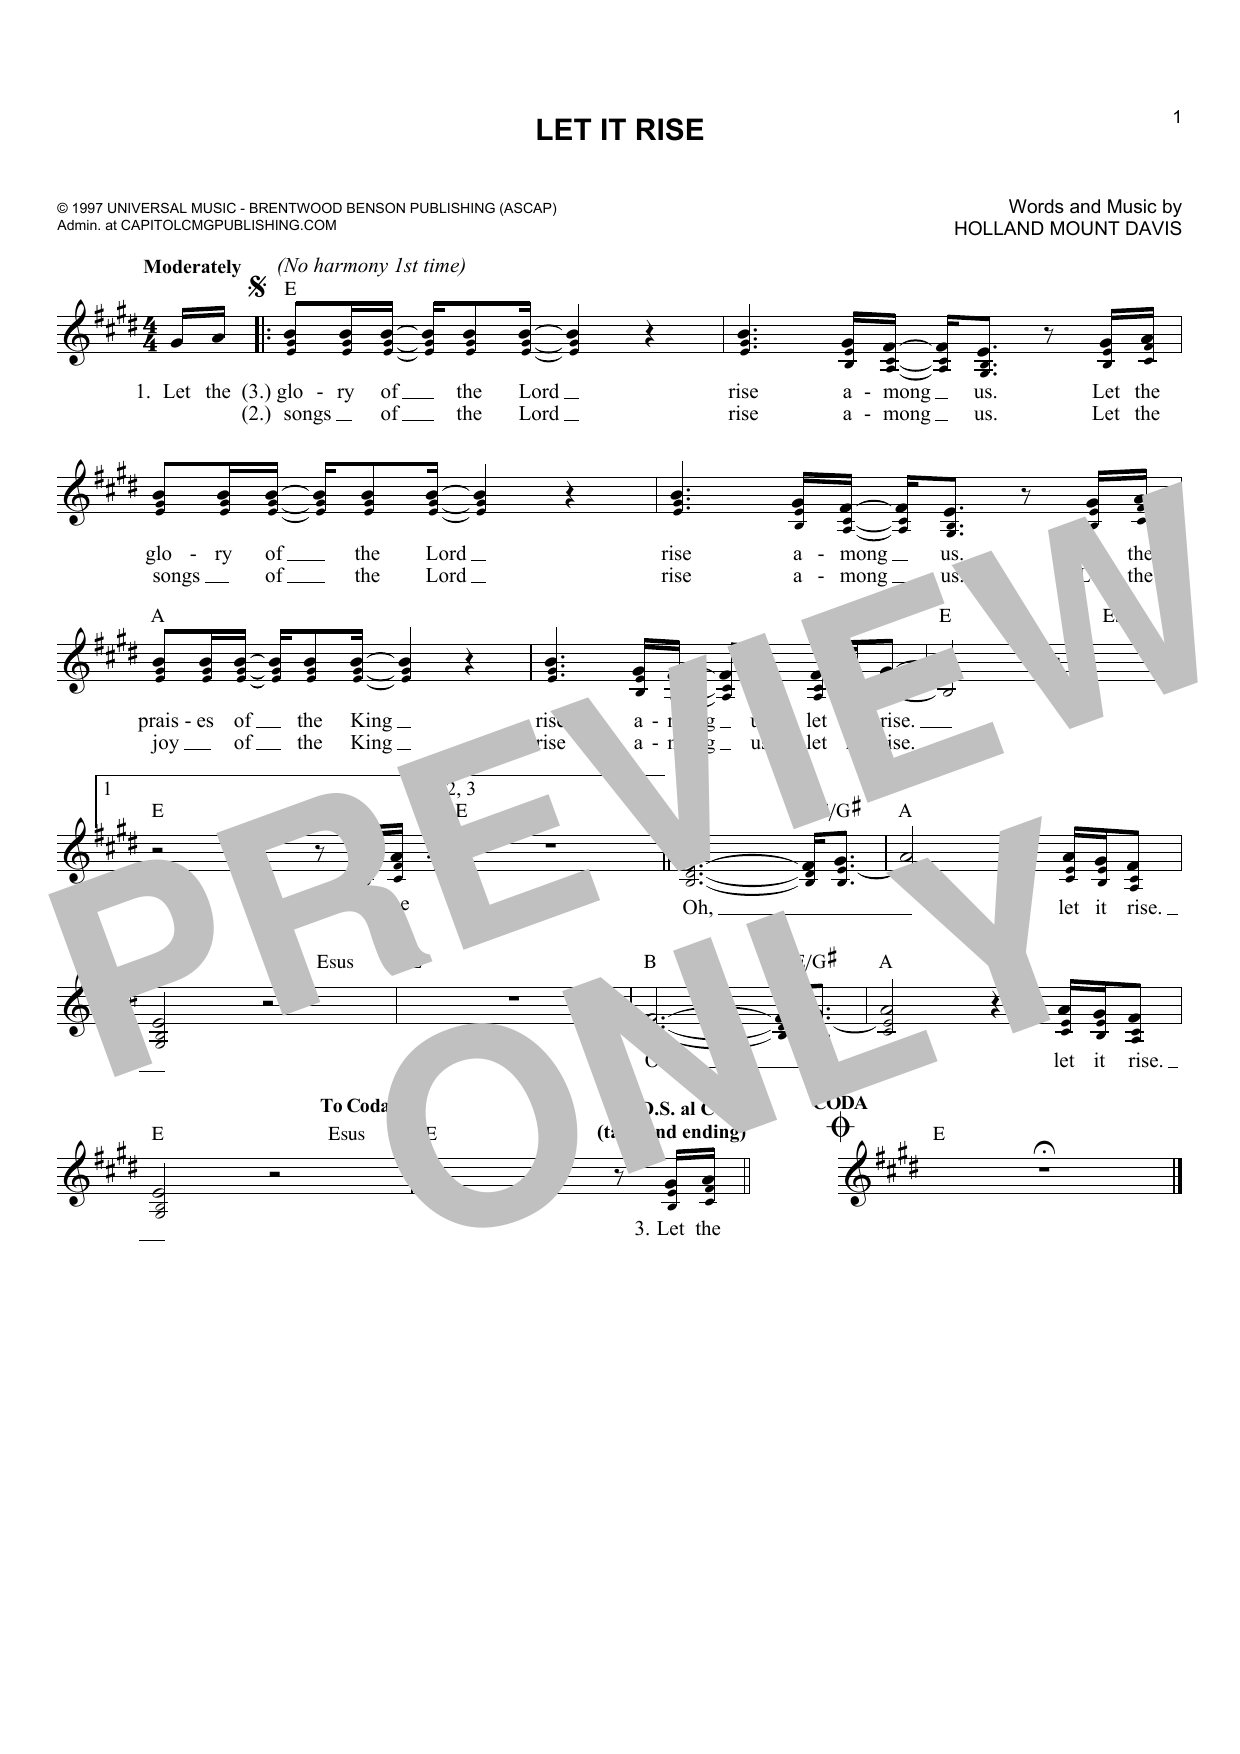 Holland Mount Davis Let It Rise sheet music notes and chords. Download Printable PDF.